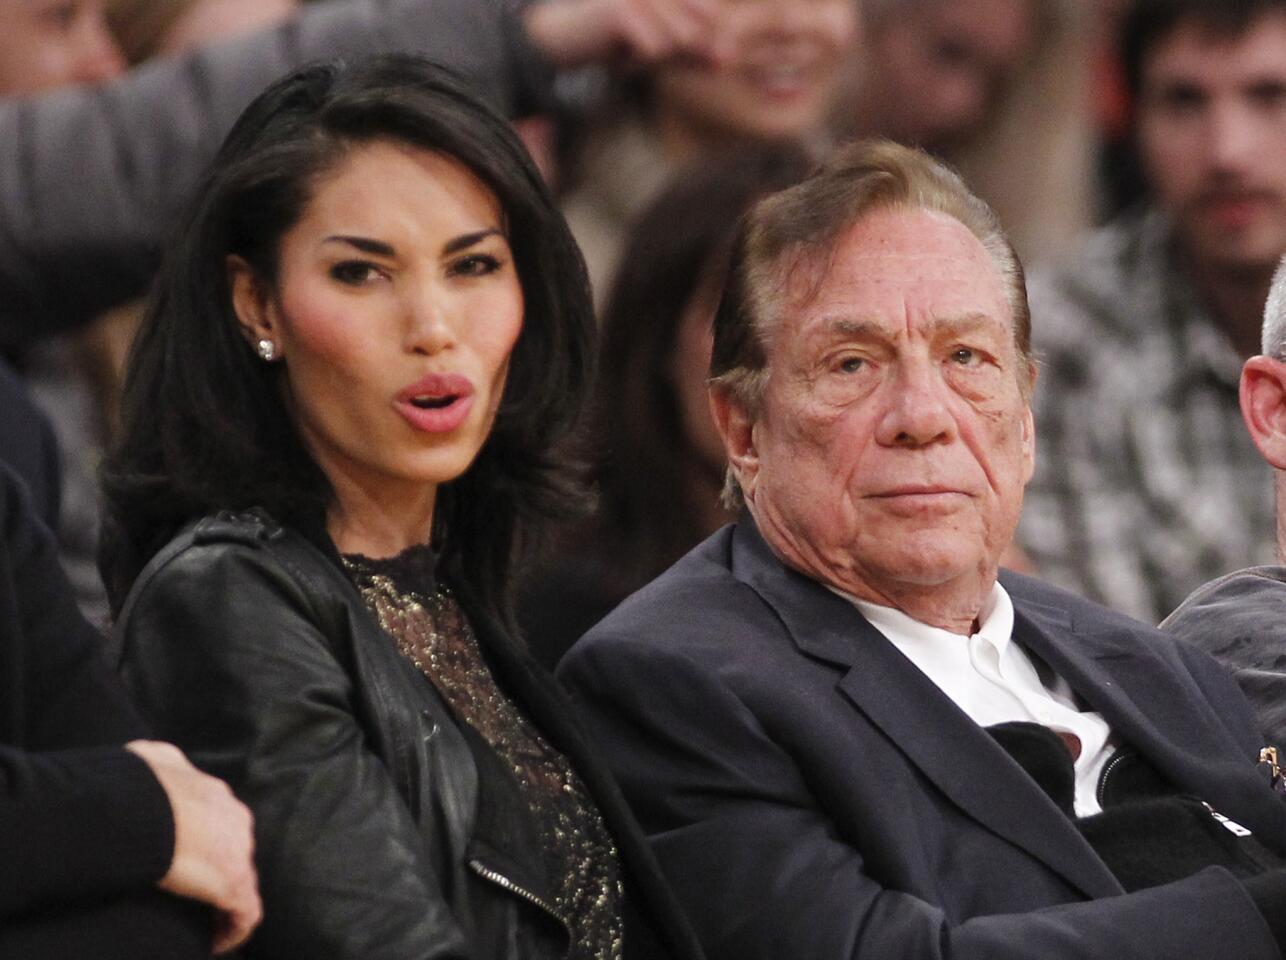 V. Stiviano and Donald Sterling